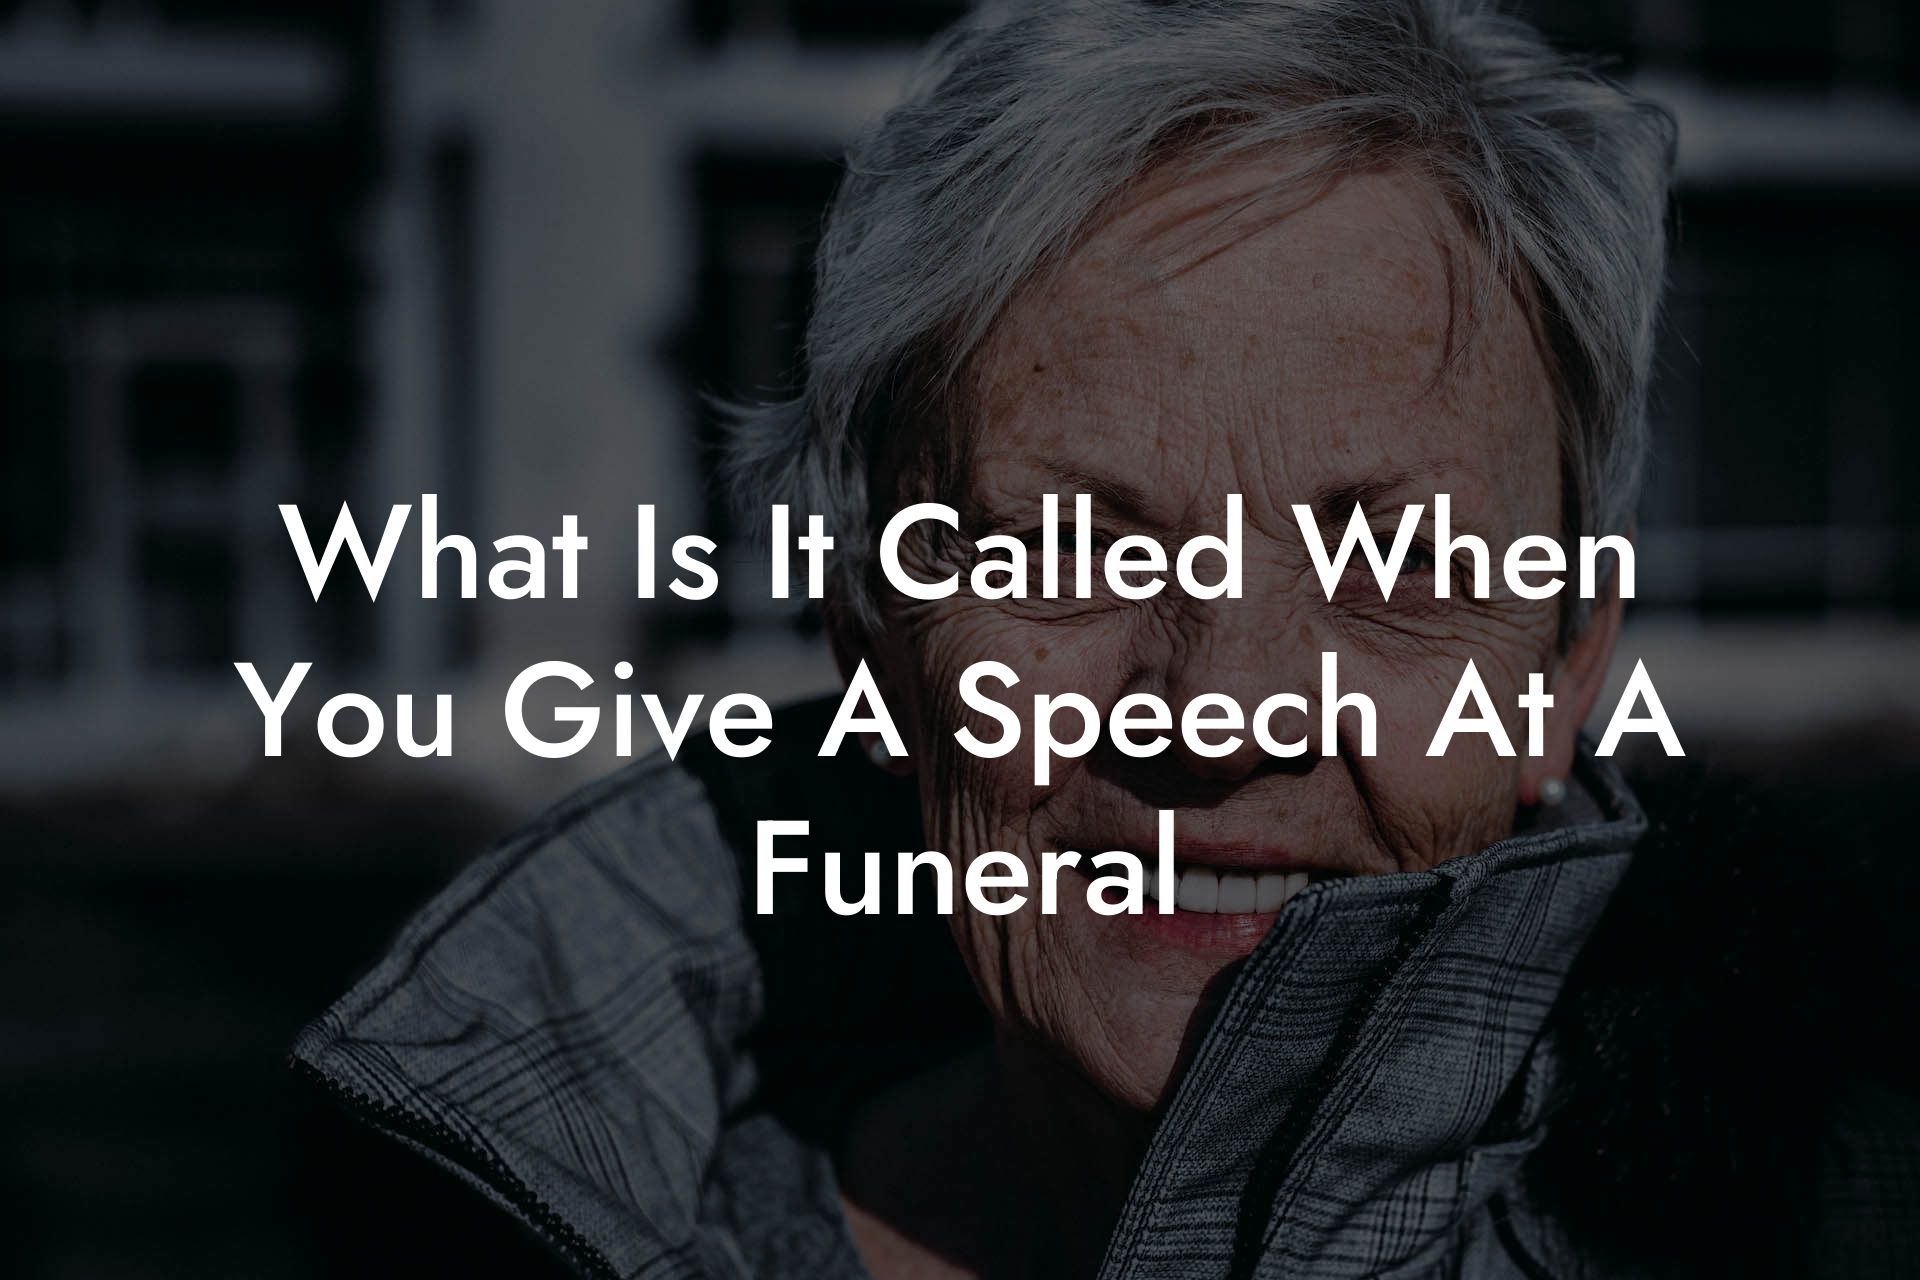 What Is It Called When You Give A Speech At A Funeral